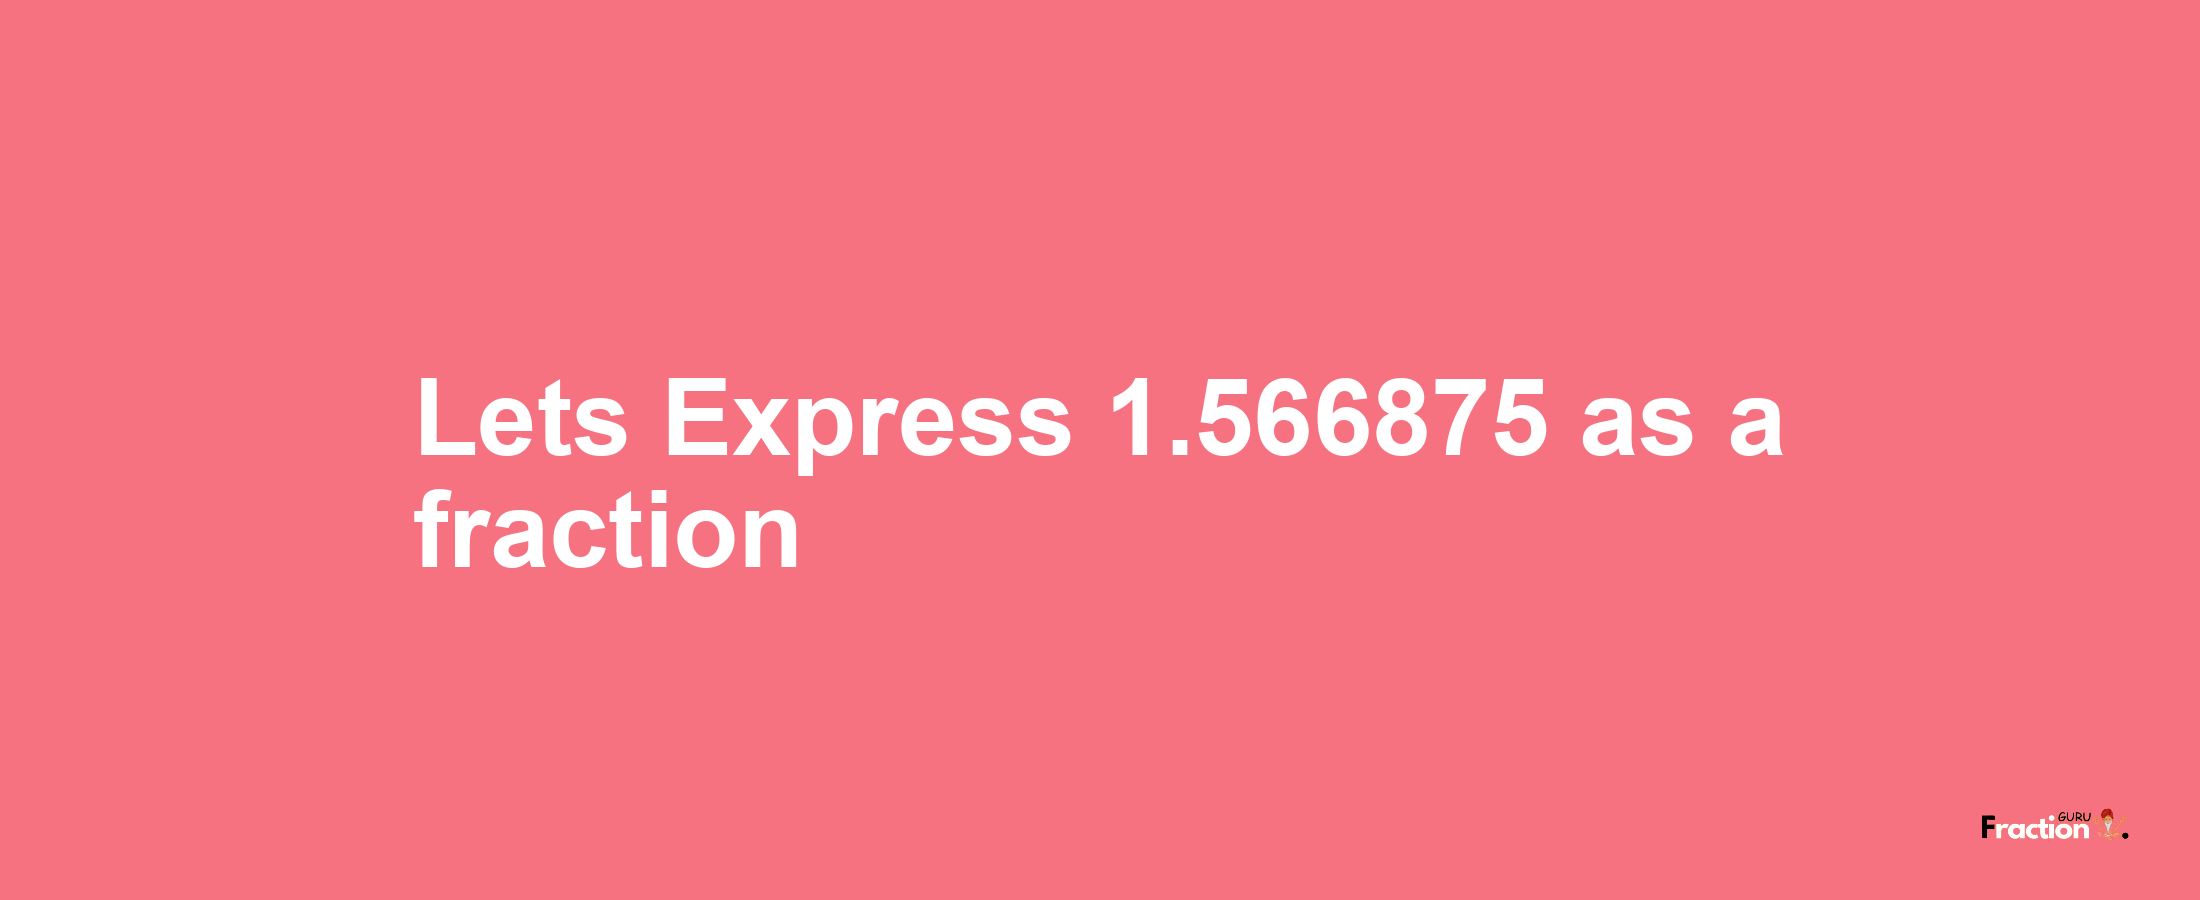 Lets Express 1.566875 as afraction